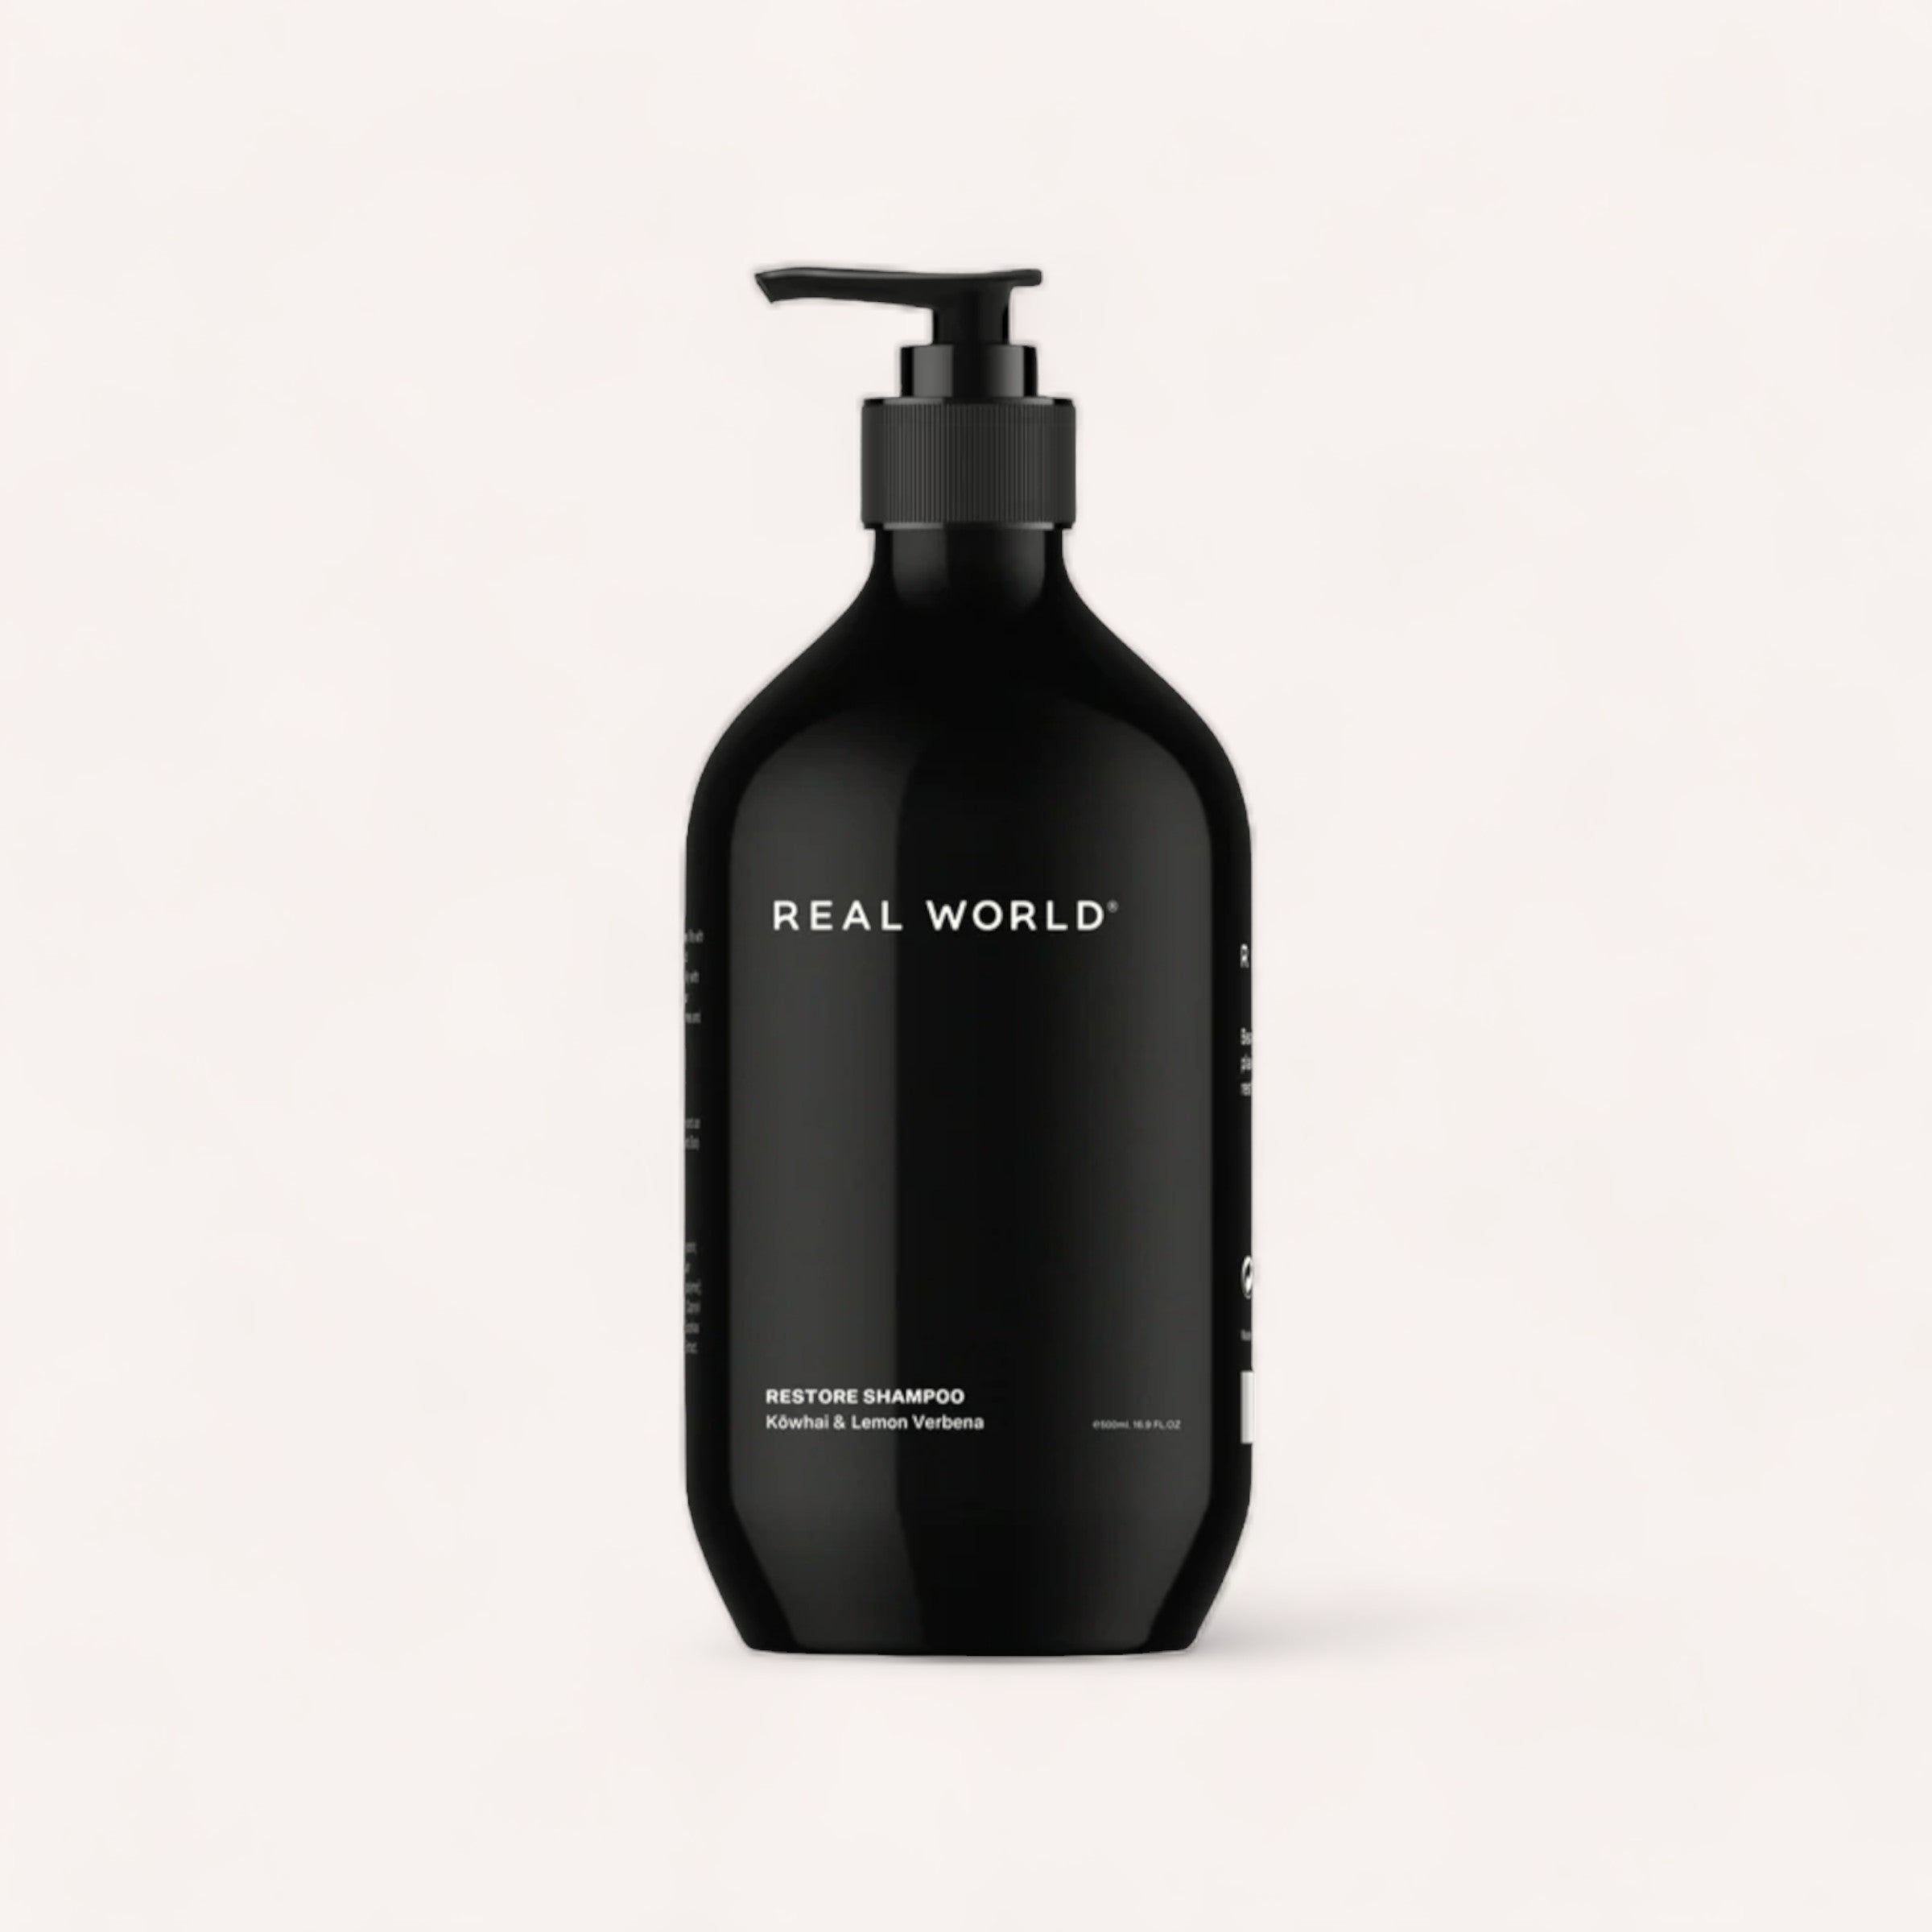 A black pump bottle labeled "Real World" with text indicating it contains Real World Shampoo with activated charcoal, placed against a clean, white background.